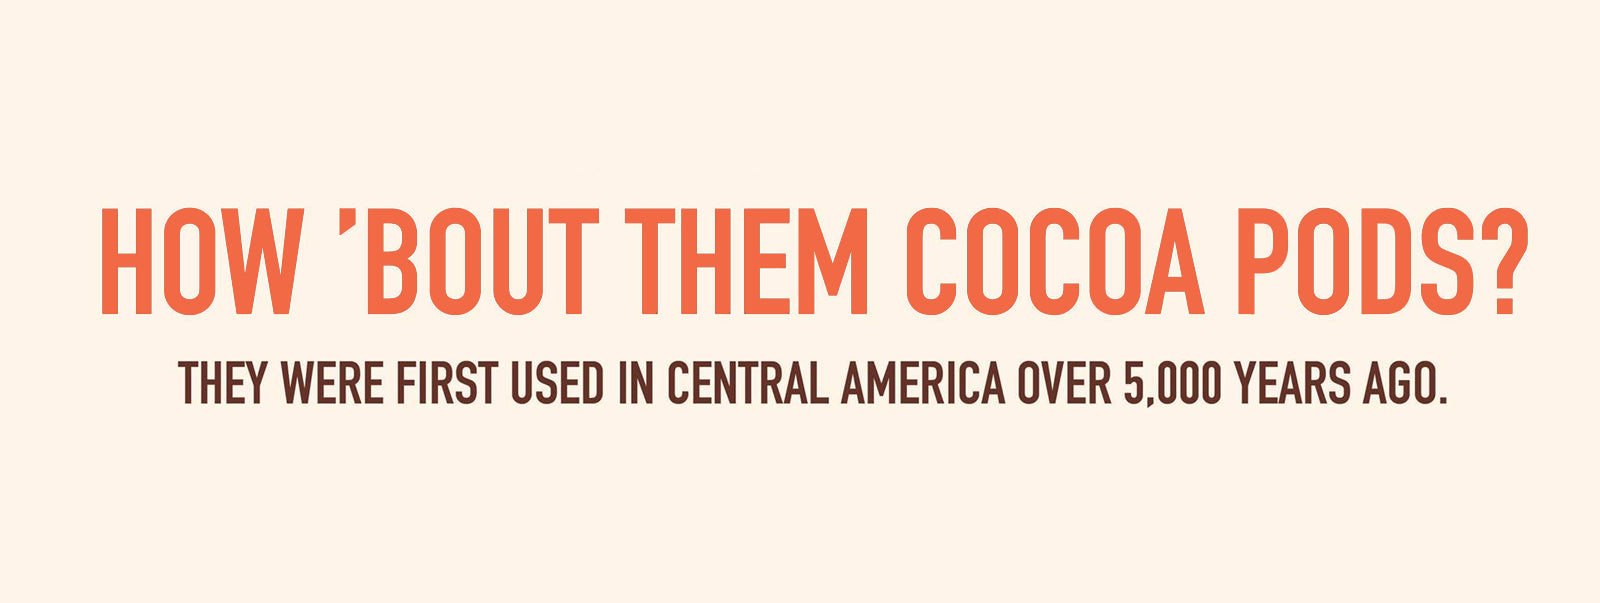 How 'Bout them cocoa pods? They were first used in central america over 5,000 years ago